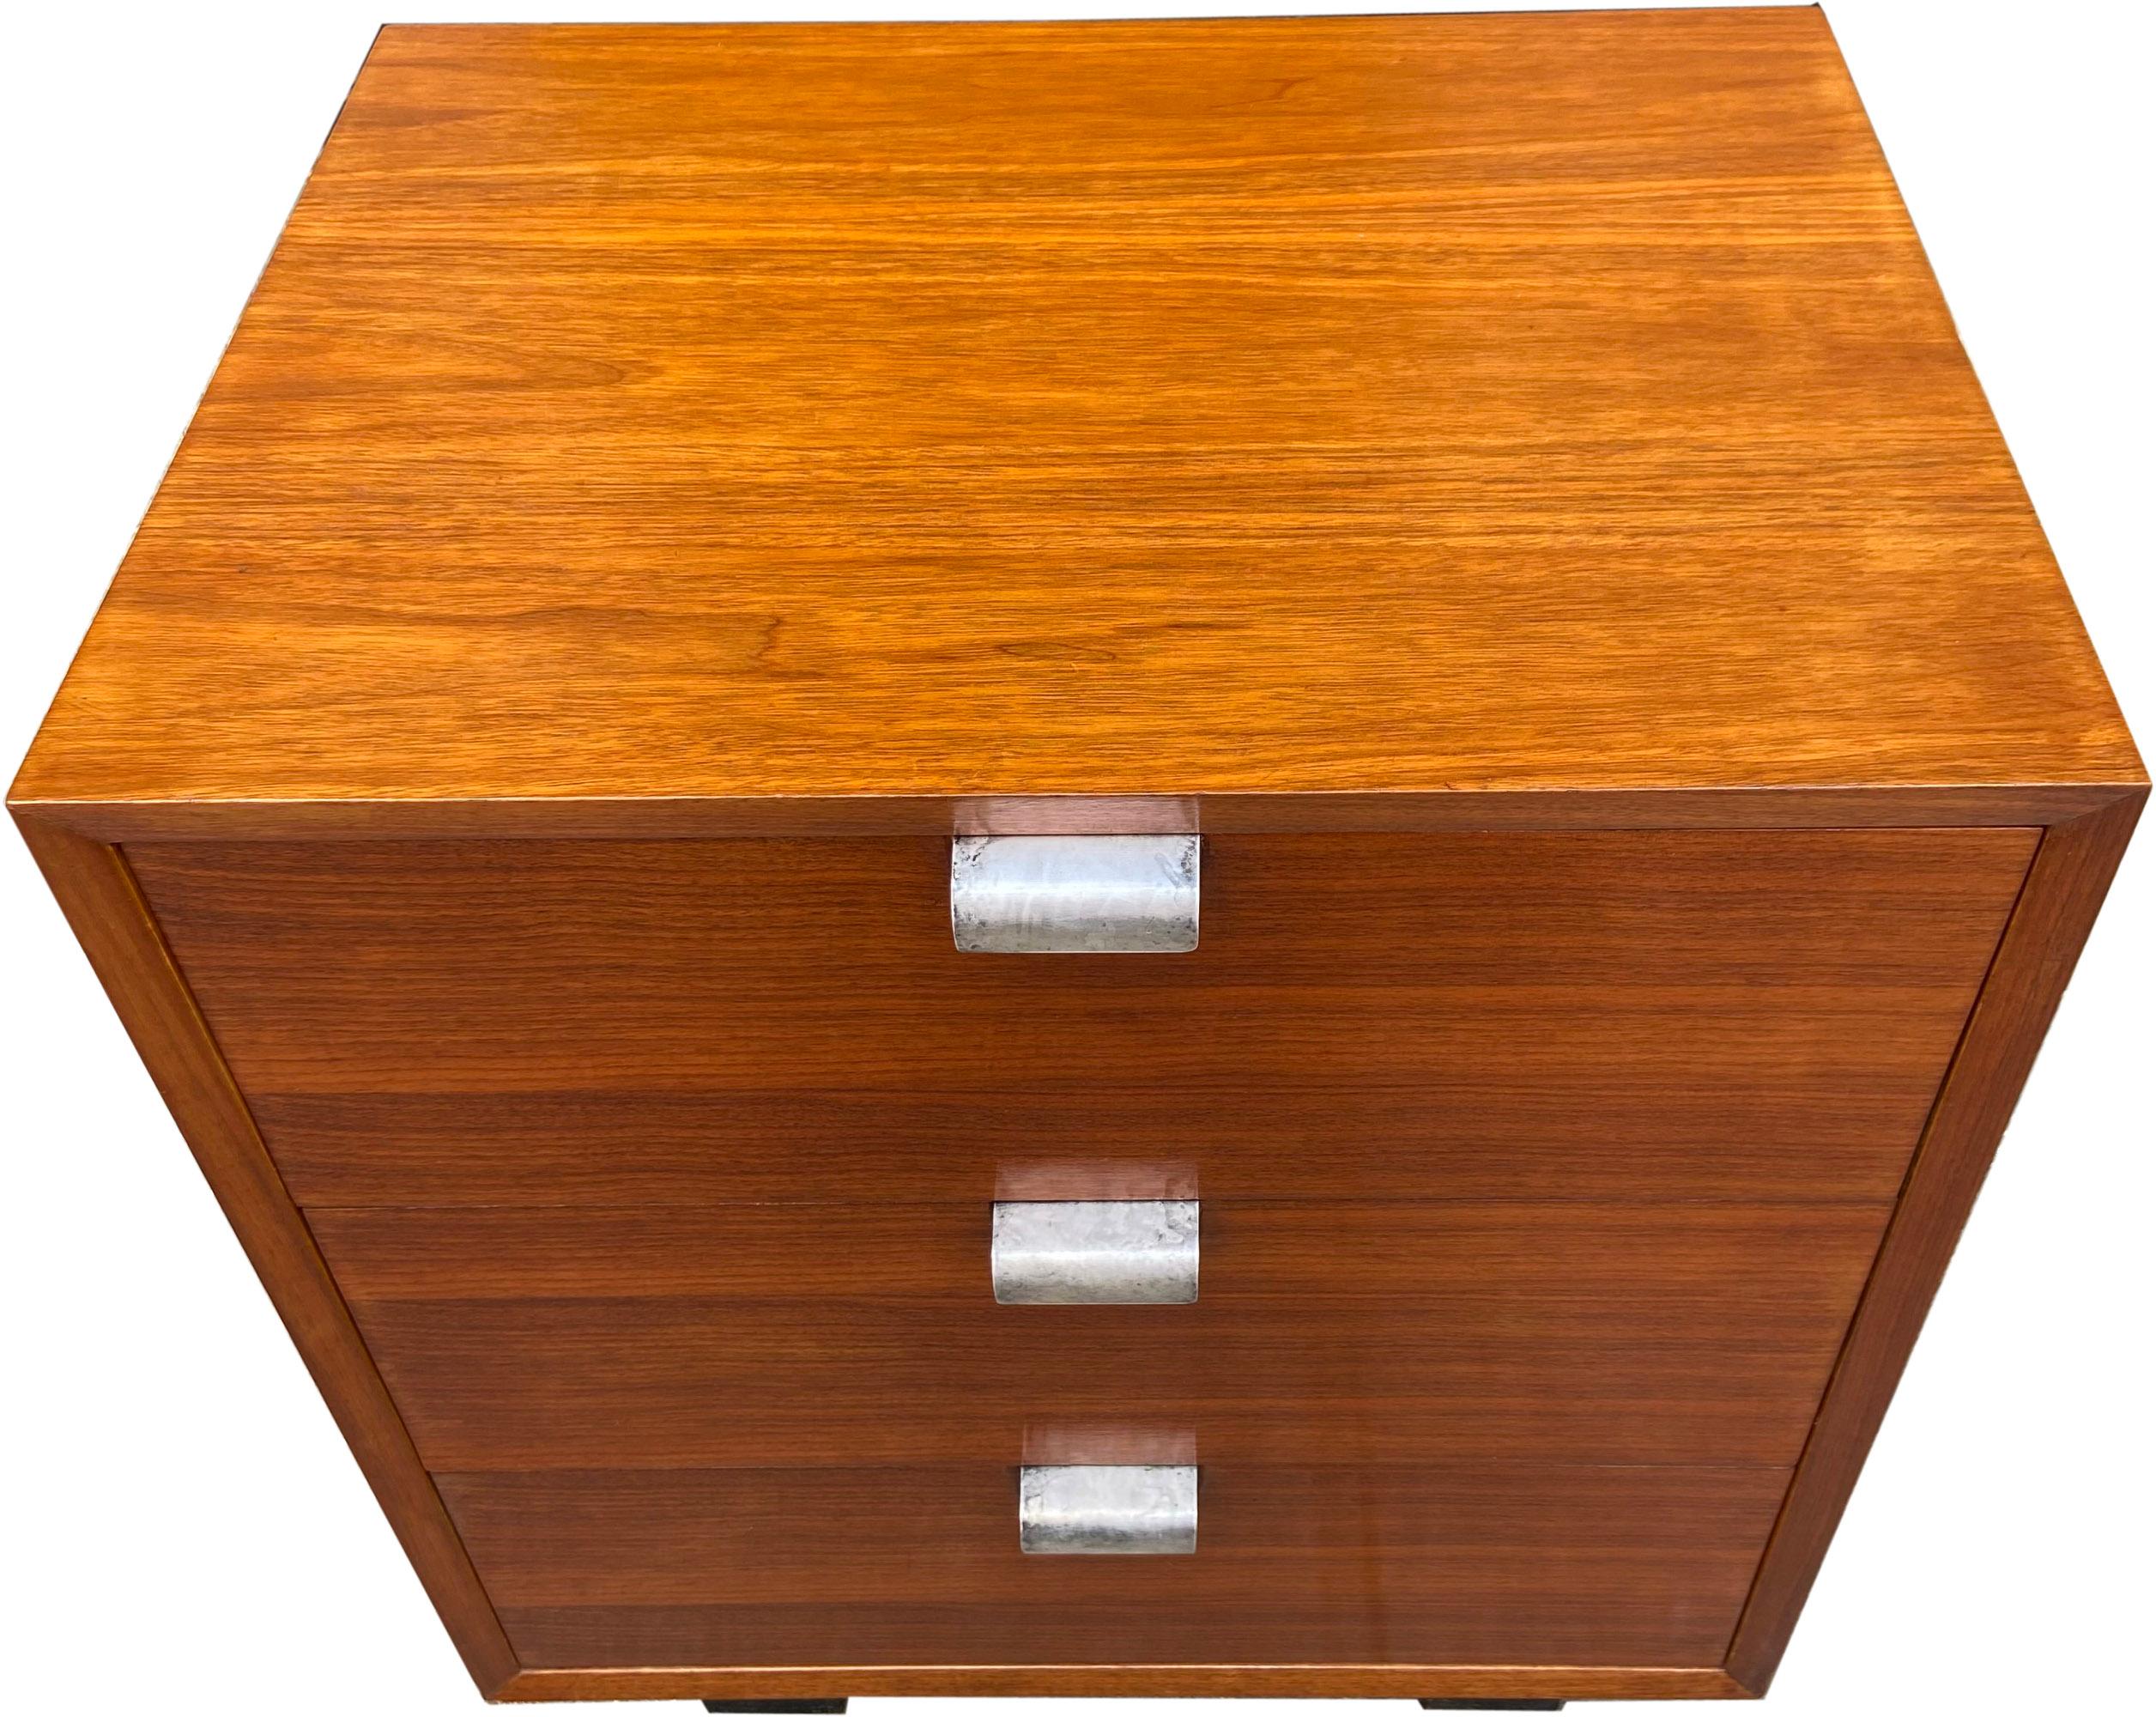 Gorgeous BCS chest of drawers in original walnut finish designed by George Nelson for Herman Miller. This is a very early version with silver plated metal pulls not aluminum. In original condition with honest and beautiful patina. This versatile